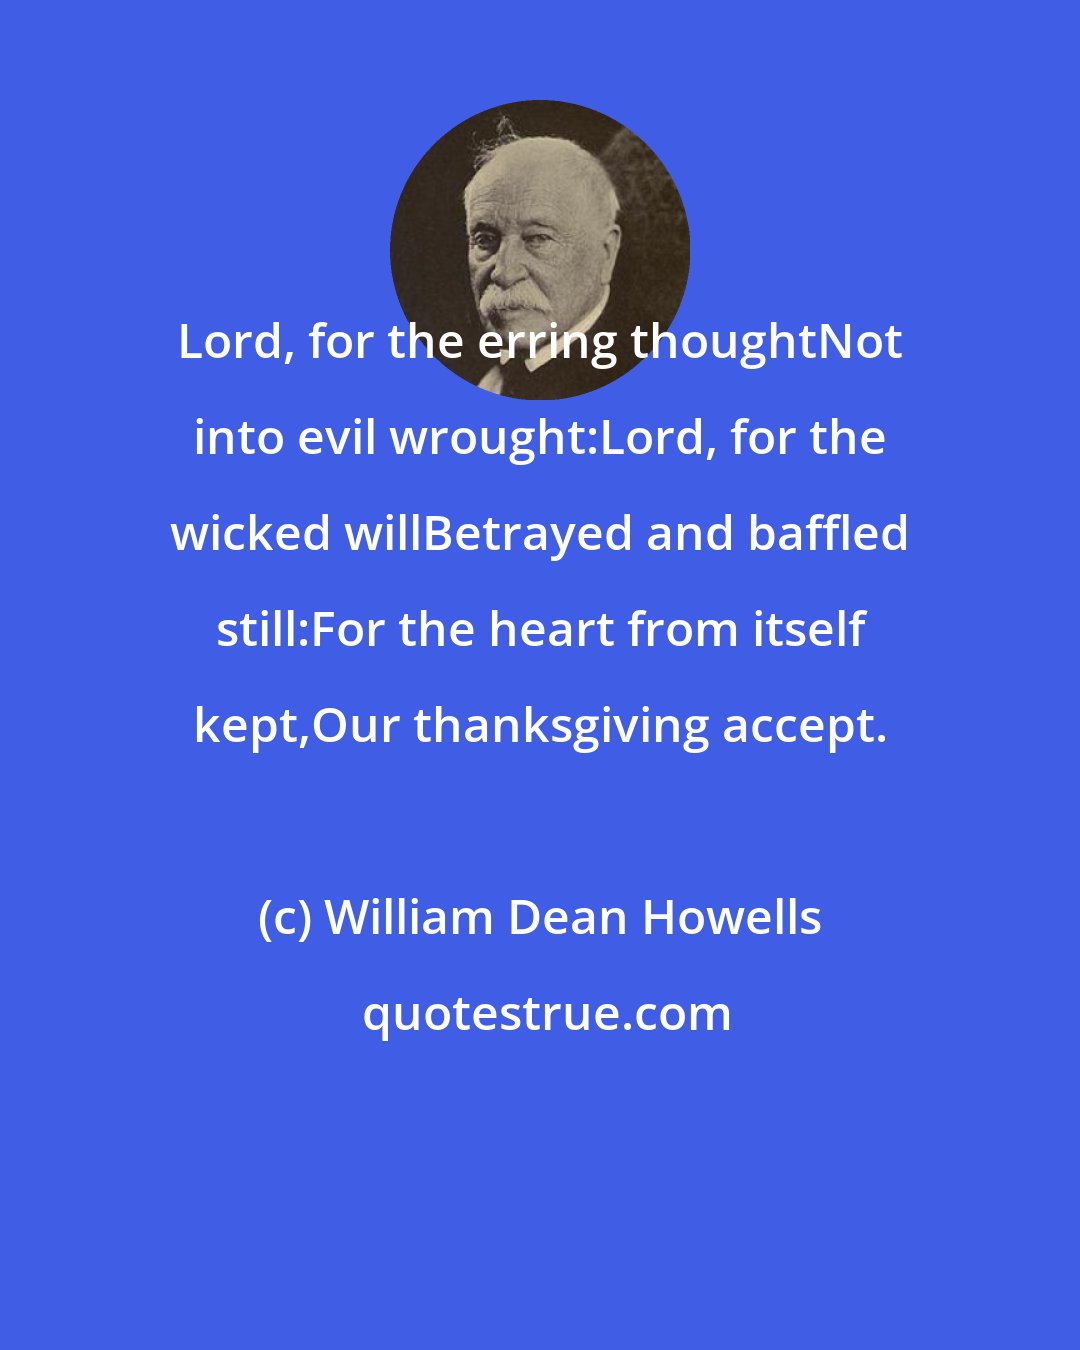 William Dean Howells: Lord, for the erring thoughtNot into evil wrought:Lord, for the wicked willBetrayed and baffled still:For the heart from itself kept,Our thanksgiving accept.